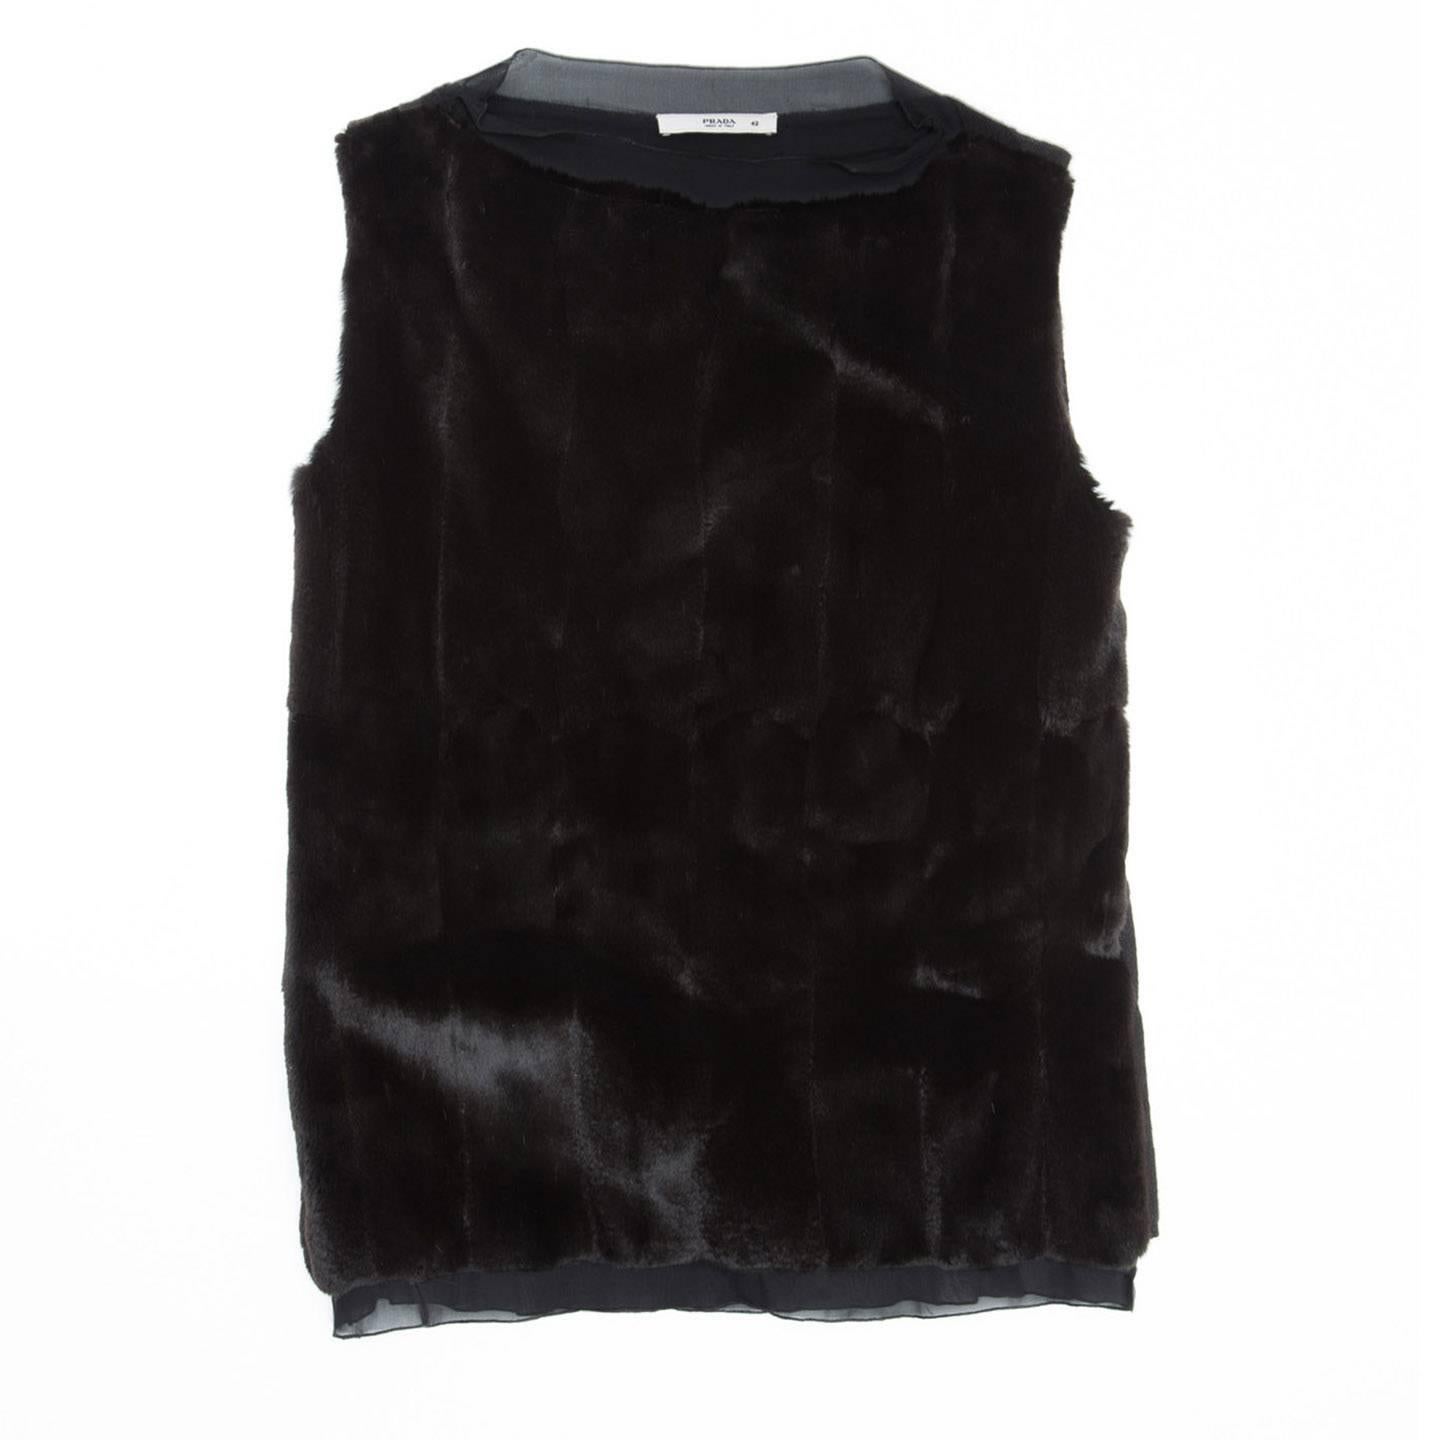 Black top with weasel fur front panel, cashmere back with a vertical design and stretch silk chiffon inserts at neck and hem. Made in Italy.

Size  42 Italian sizing

Condition  Excellent: worn once